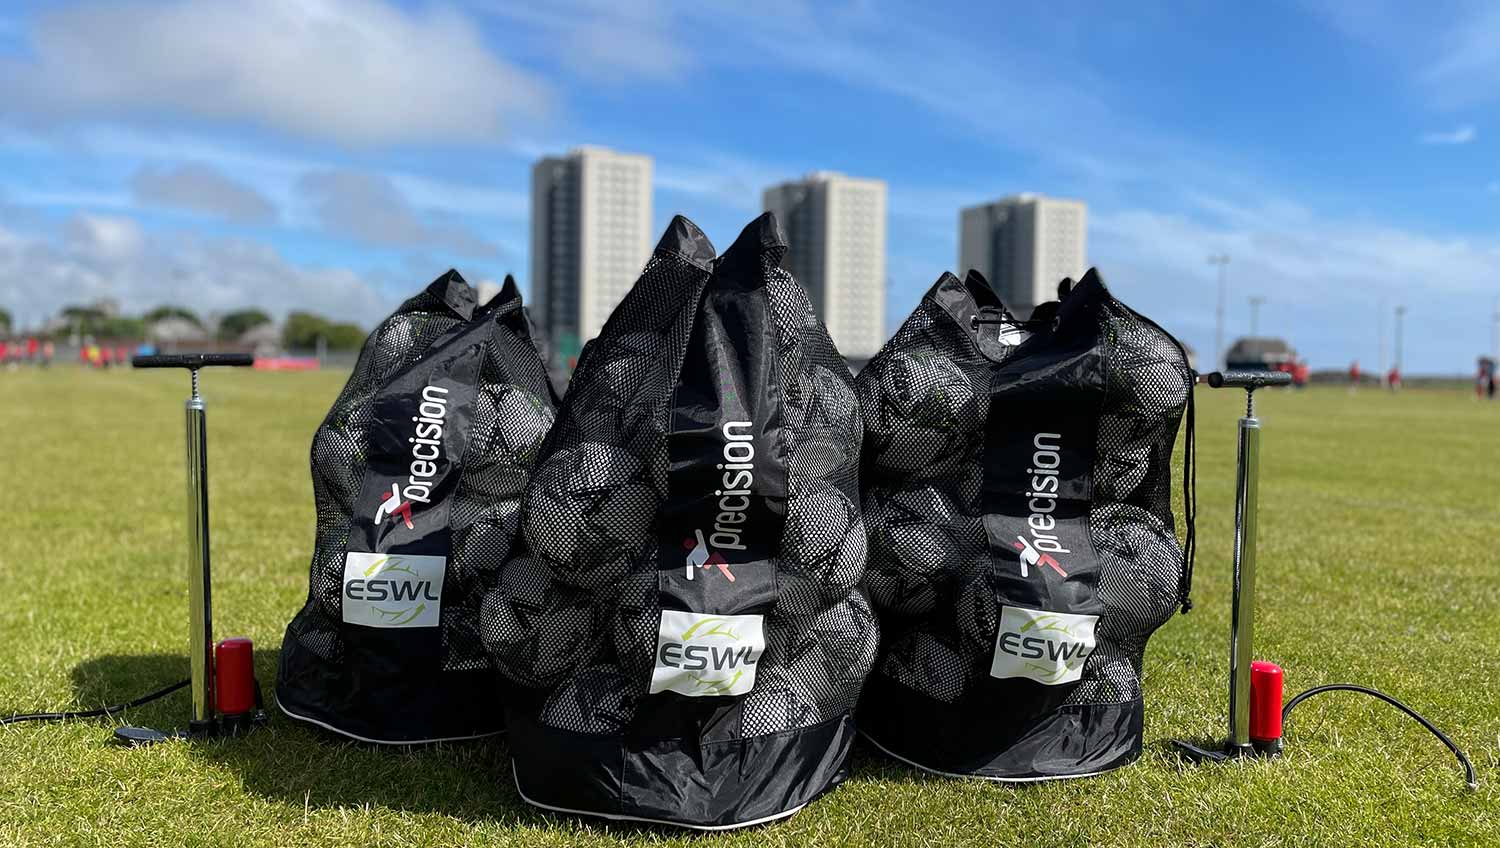 A photograph of footballs, football bags, pumps, to cones and markers for our coaches as sponsored by ESWL